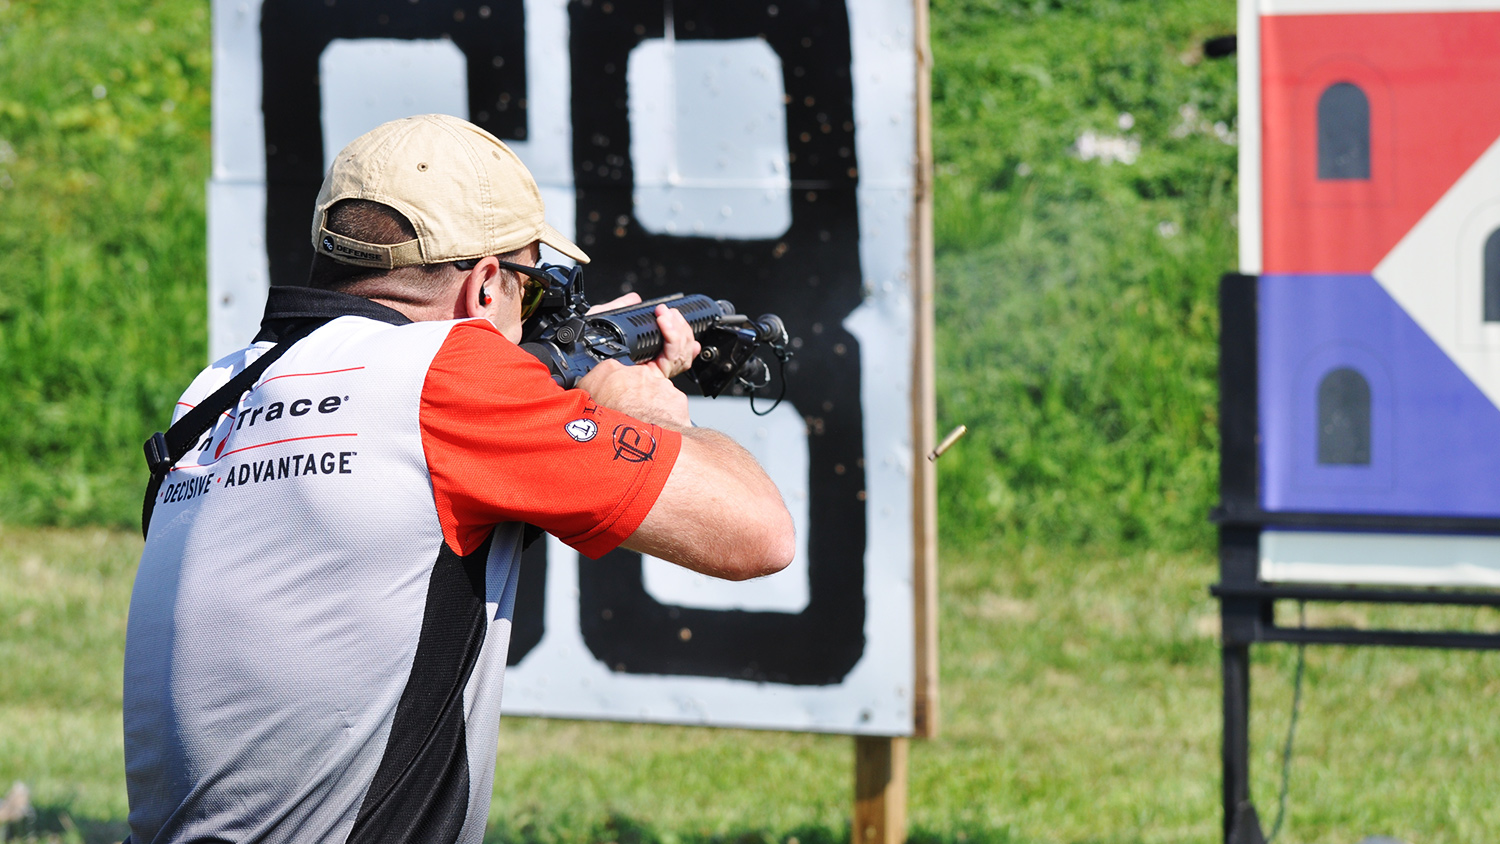 Iain Harrison competes using an angled reflex sight and a higher magnification variable